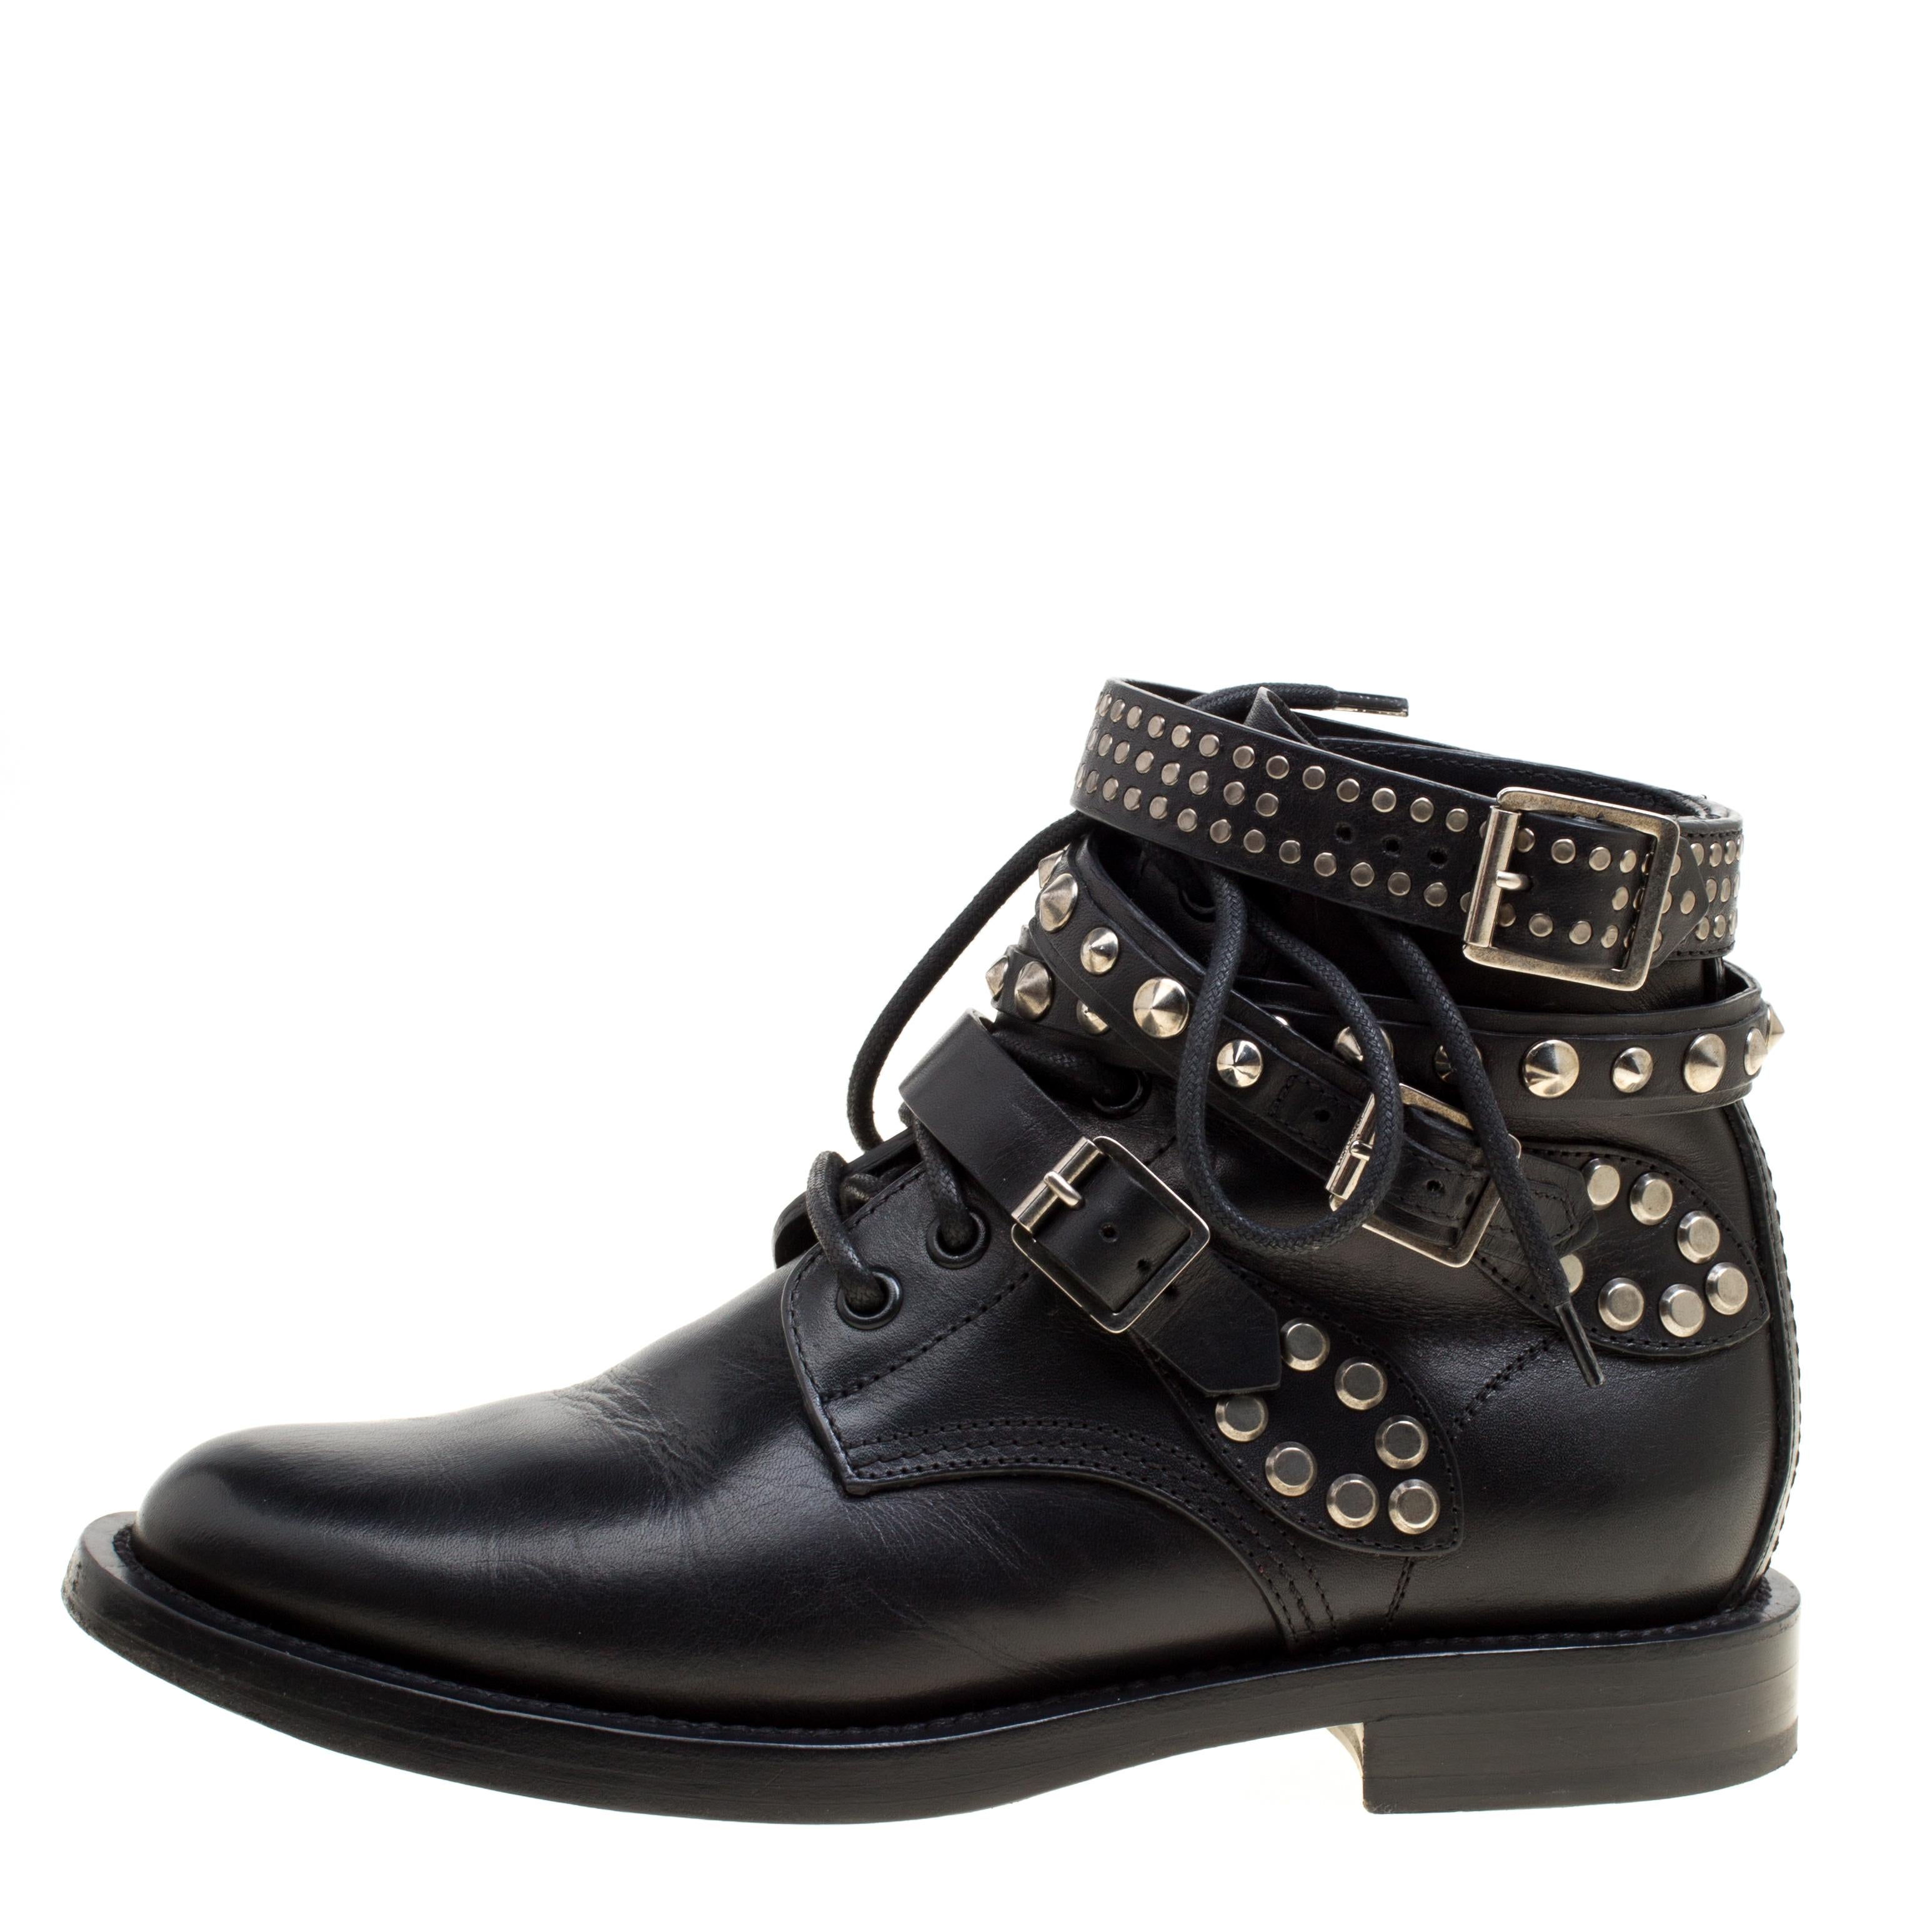 These Rangers ankle boots by Saint Laurent Paris will transform your looks with sophistication and class. They have a black leather exterior with belted straps accented with studs on the ankles. They feature almond toes along with lace-ups on the